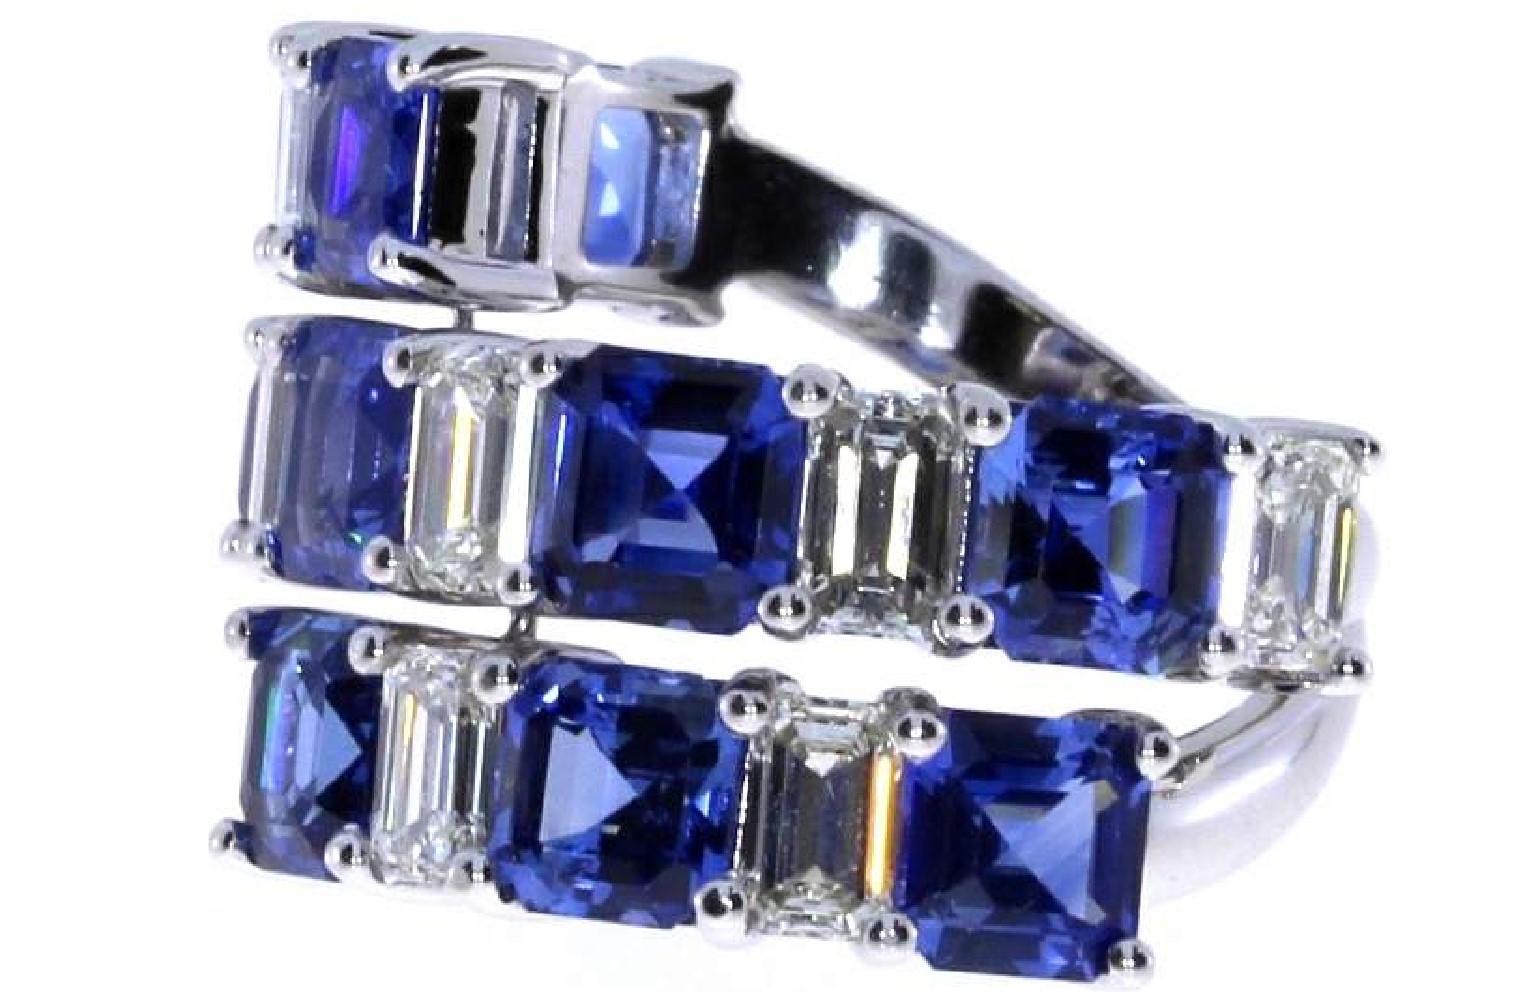 Handmade
18K White Gold
8.13ct Total Sapphire
2.62ct Total Diamond
Signature Ounce Collection Design
Designed, Handpicked, & Manufactured From Scratch In Los Angeles Using Only The Finest Materials and Workmanship